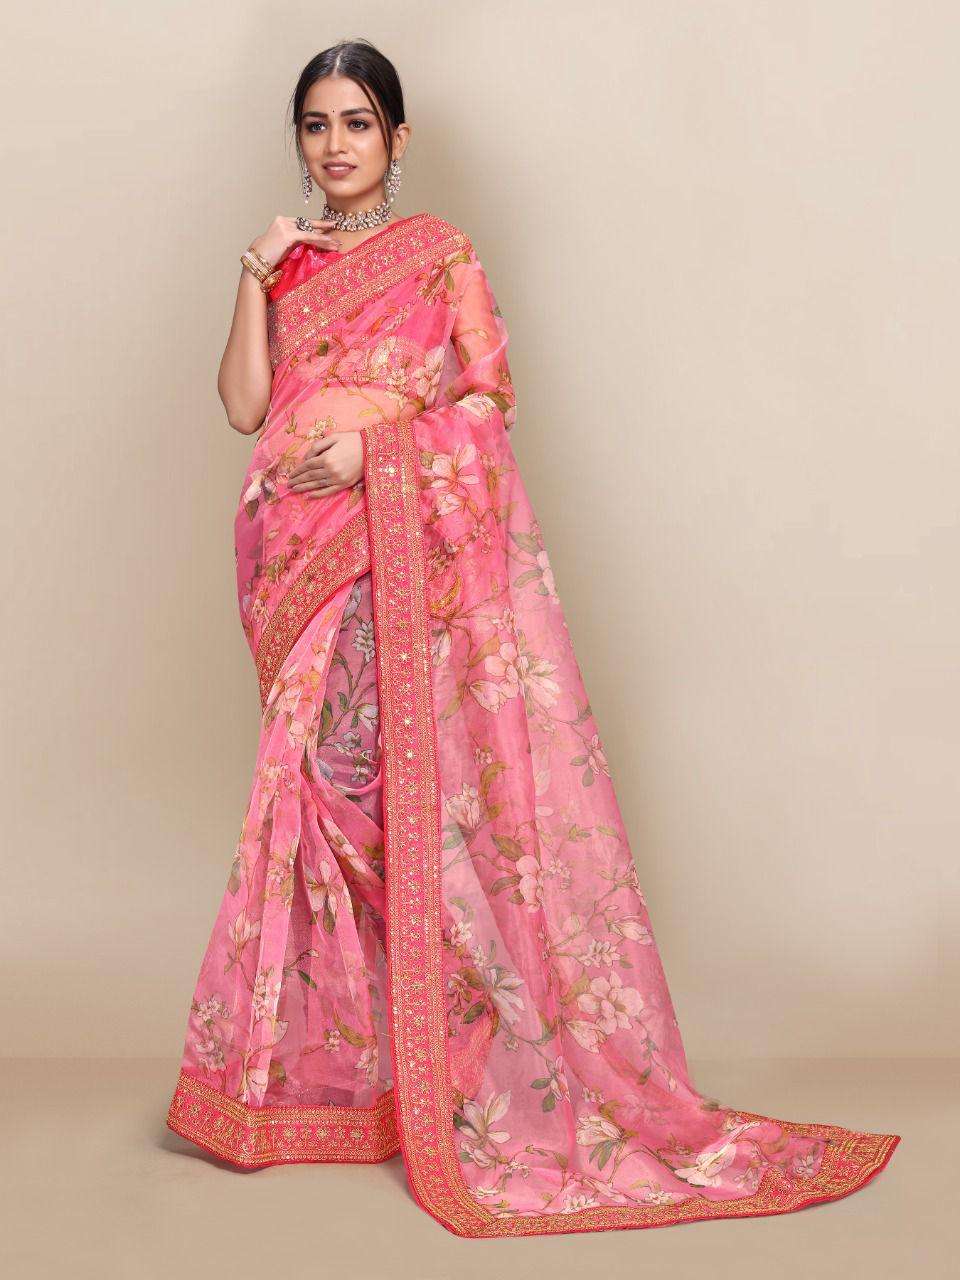 ORGENZA WITH SEQUENCE WORK BORDER PARTY WEAR SAREE COLLECITO...